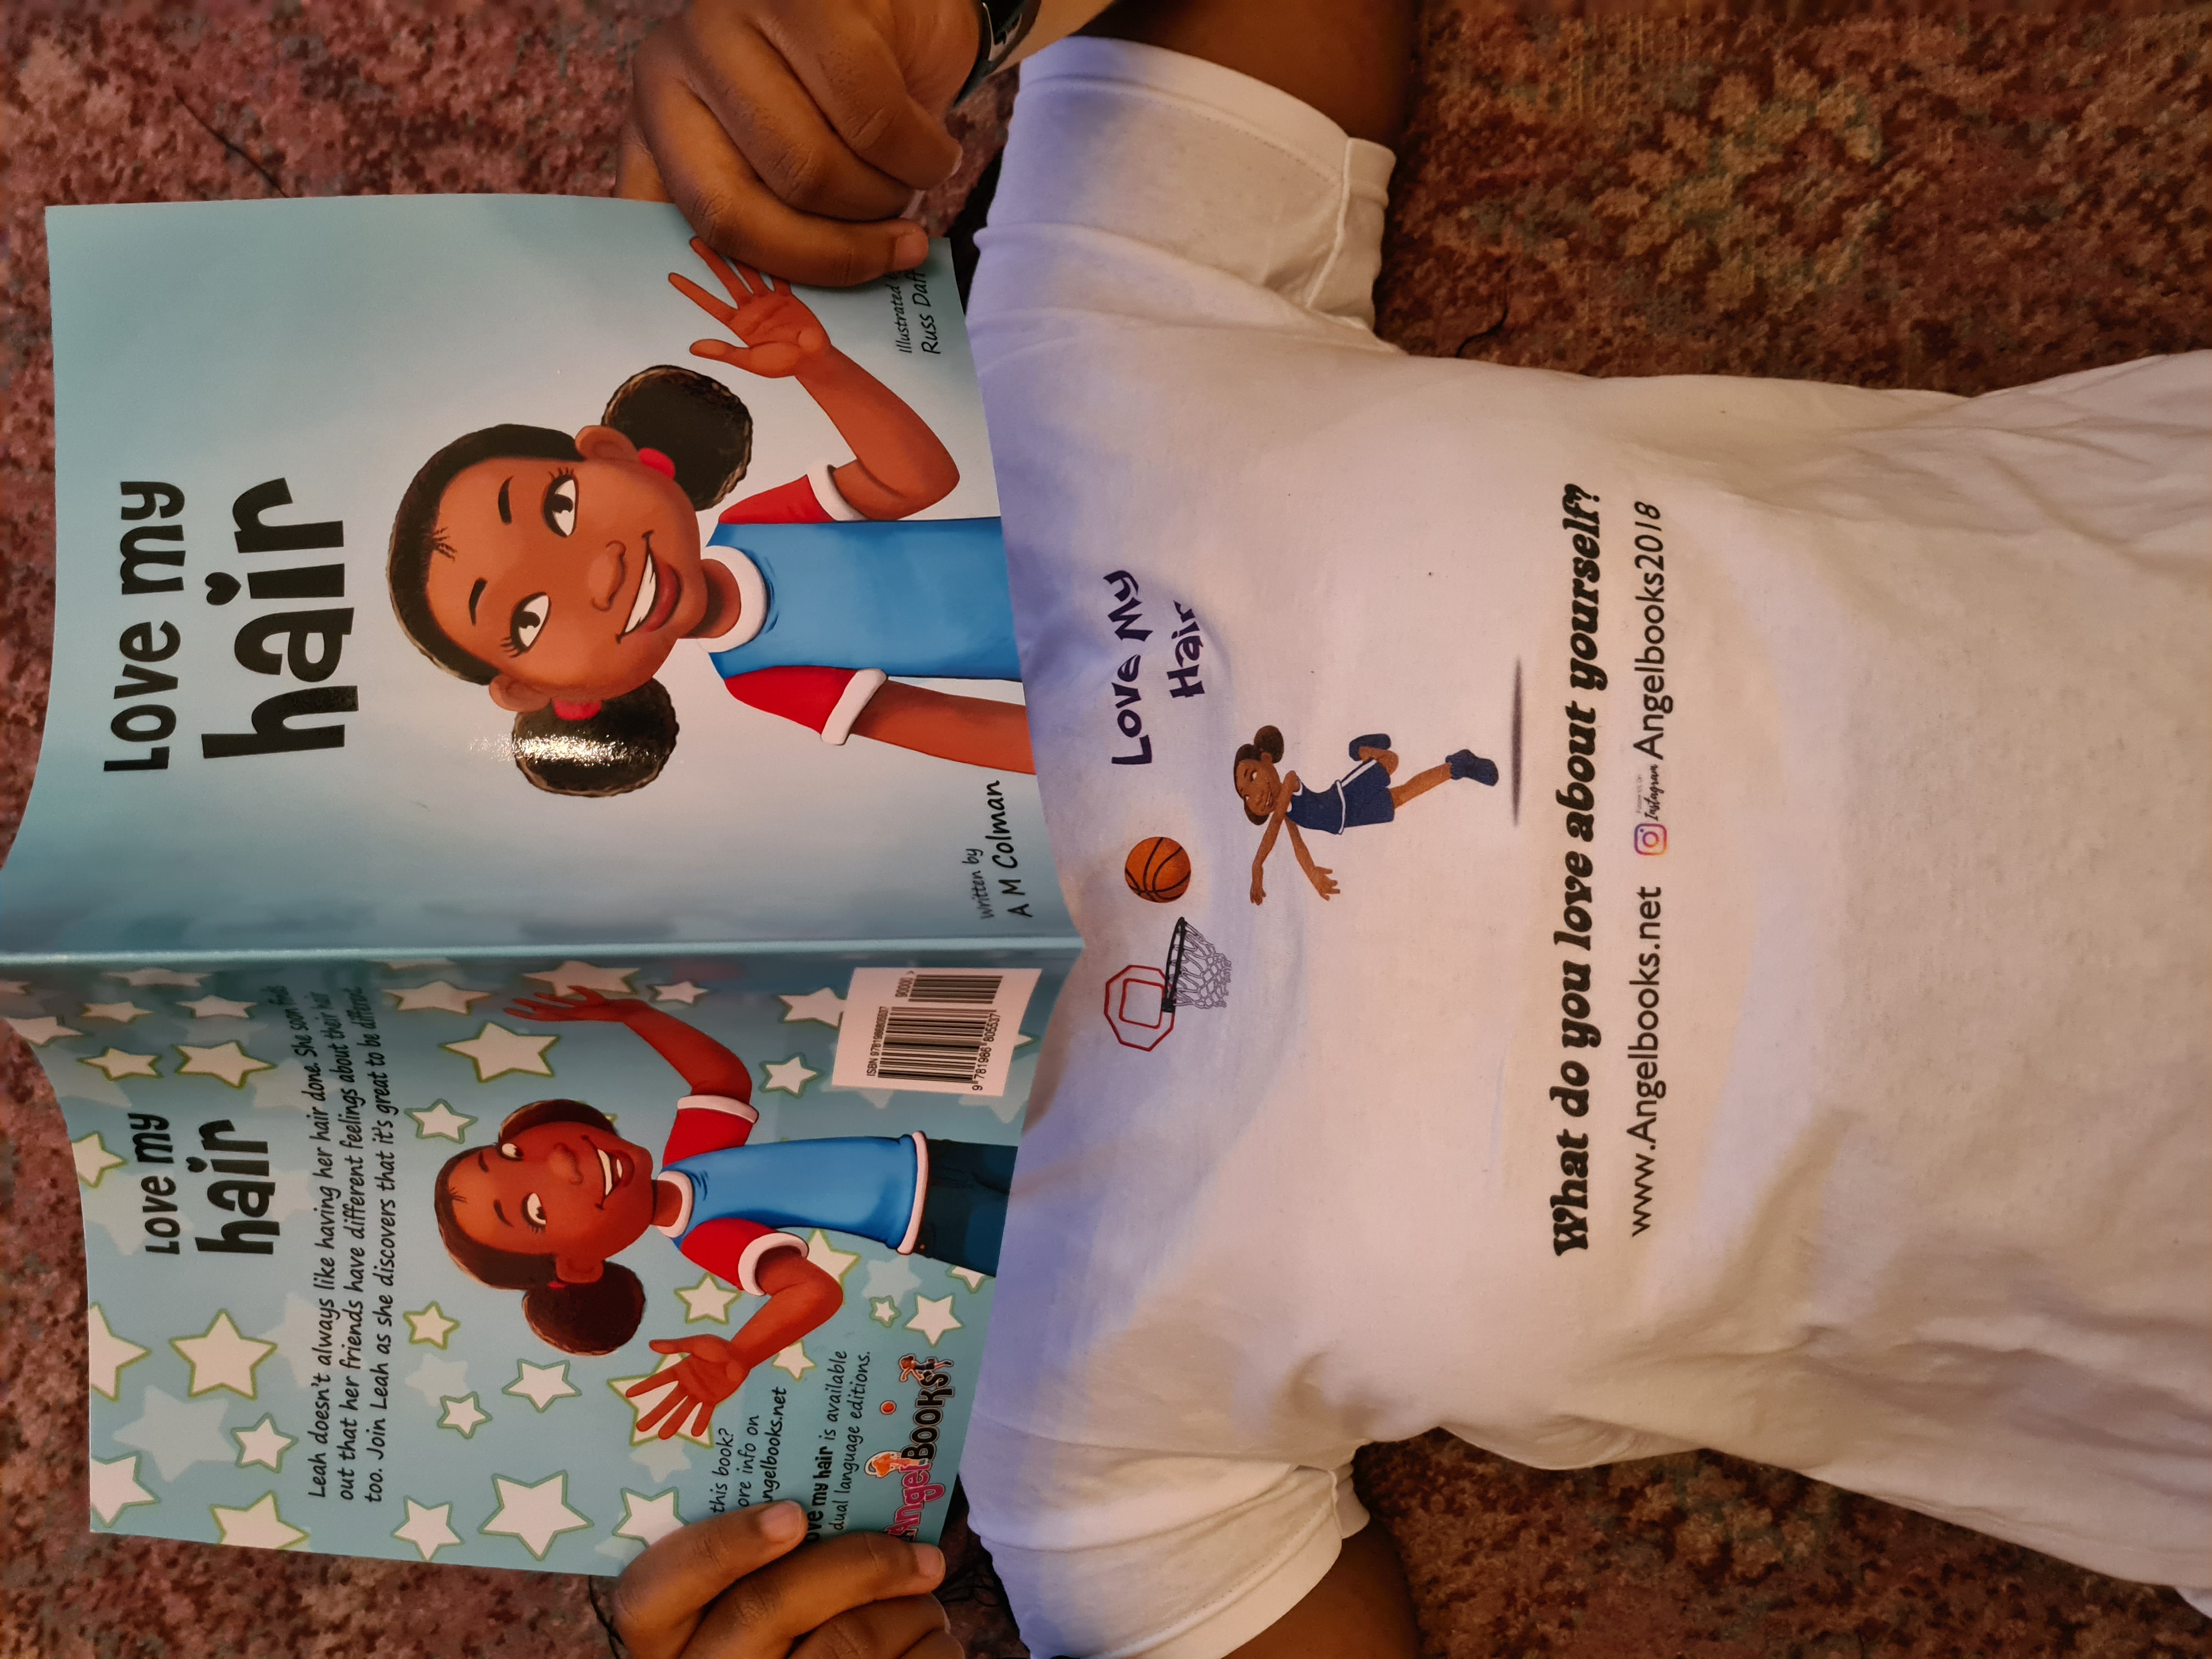 A Black girl holds a book in front of her. On the cover of the book ia a cartoon of a Black girl with the words 'Love my hair' written above.